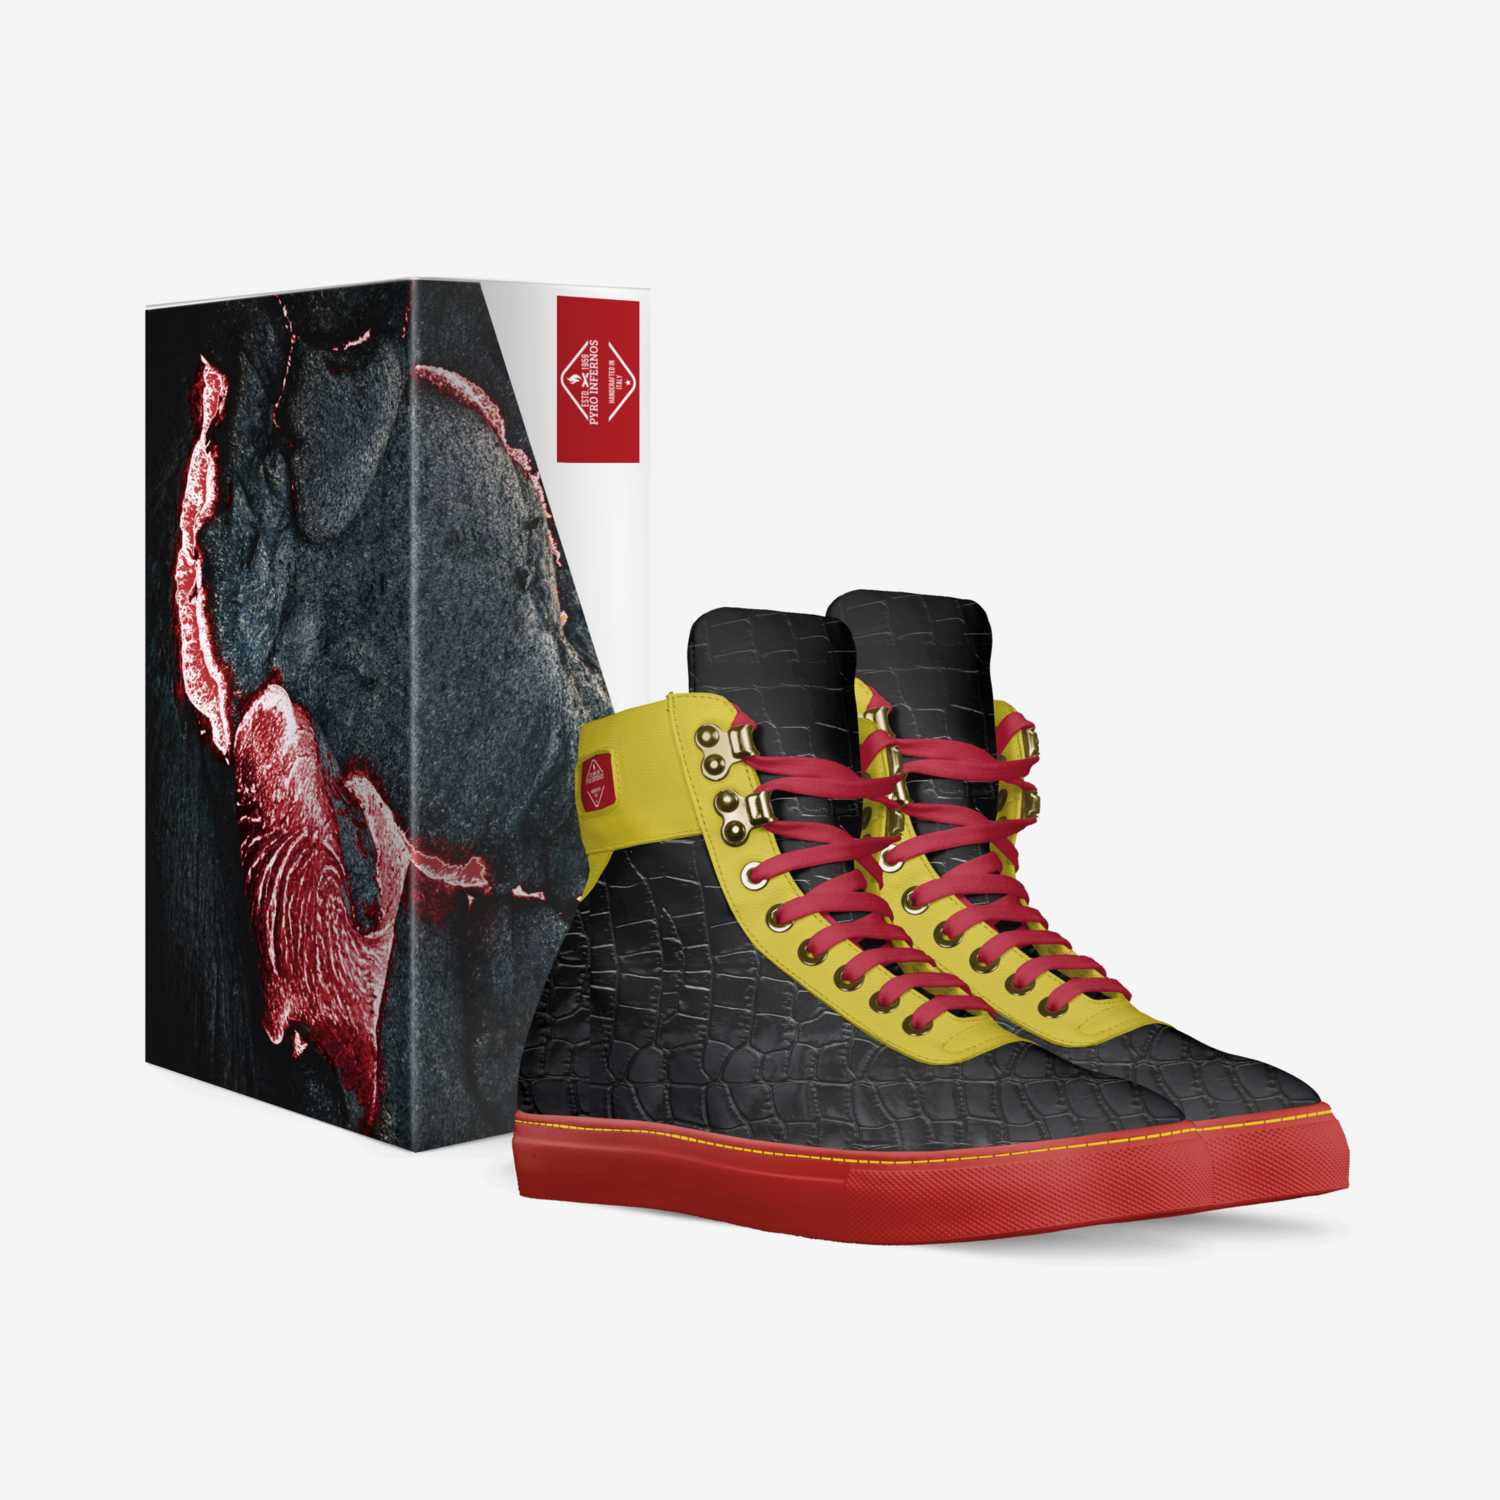 Pyro infernos  custom made in Italy shoes by Roman Campbell | Box view